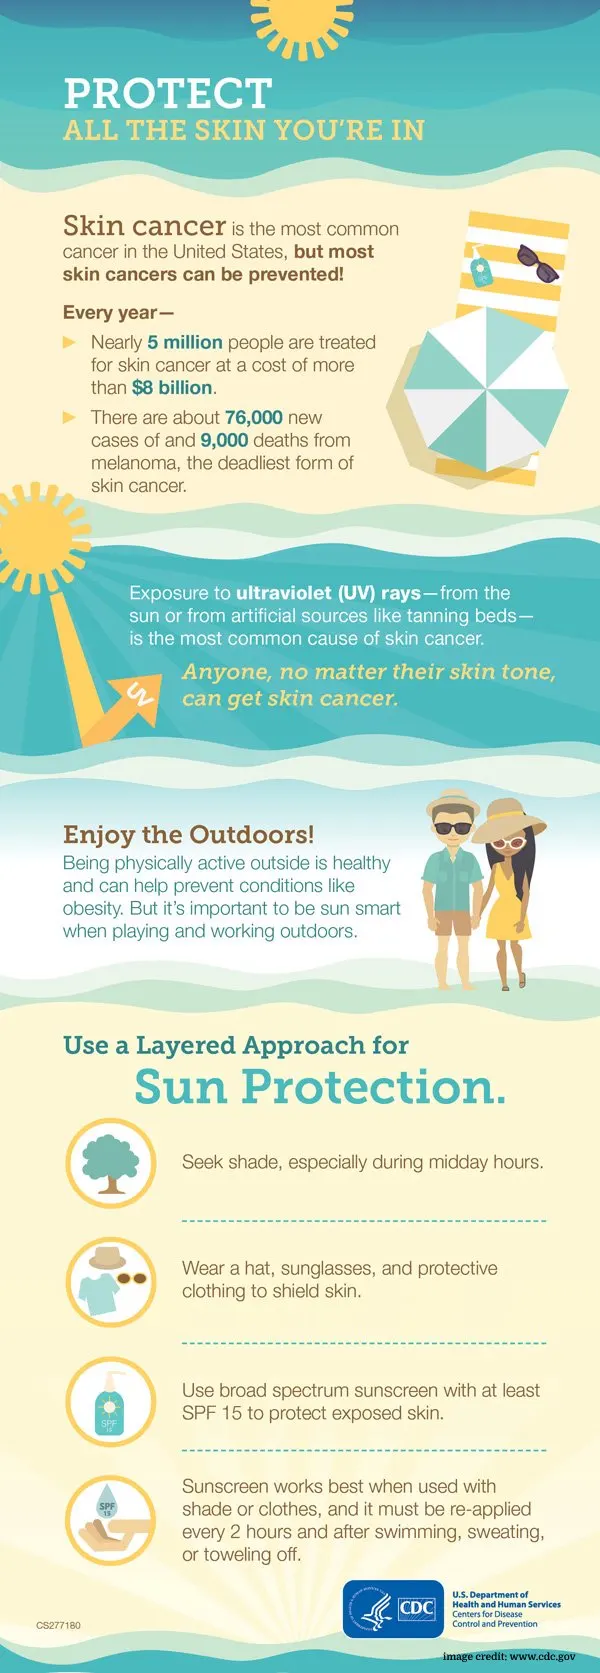 Sunscreens Work to Protect Your Skin From Sun Damage